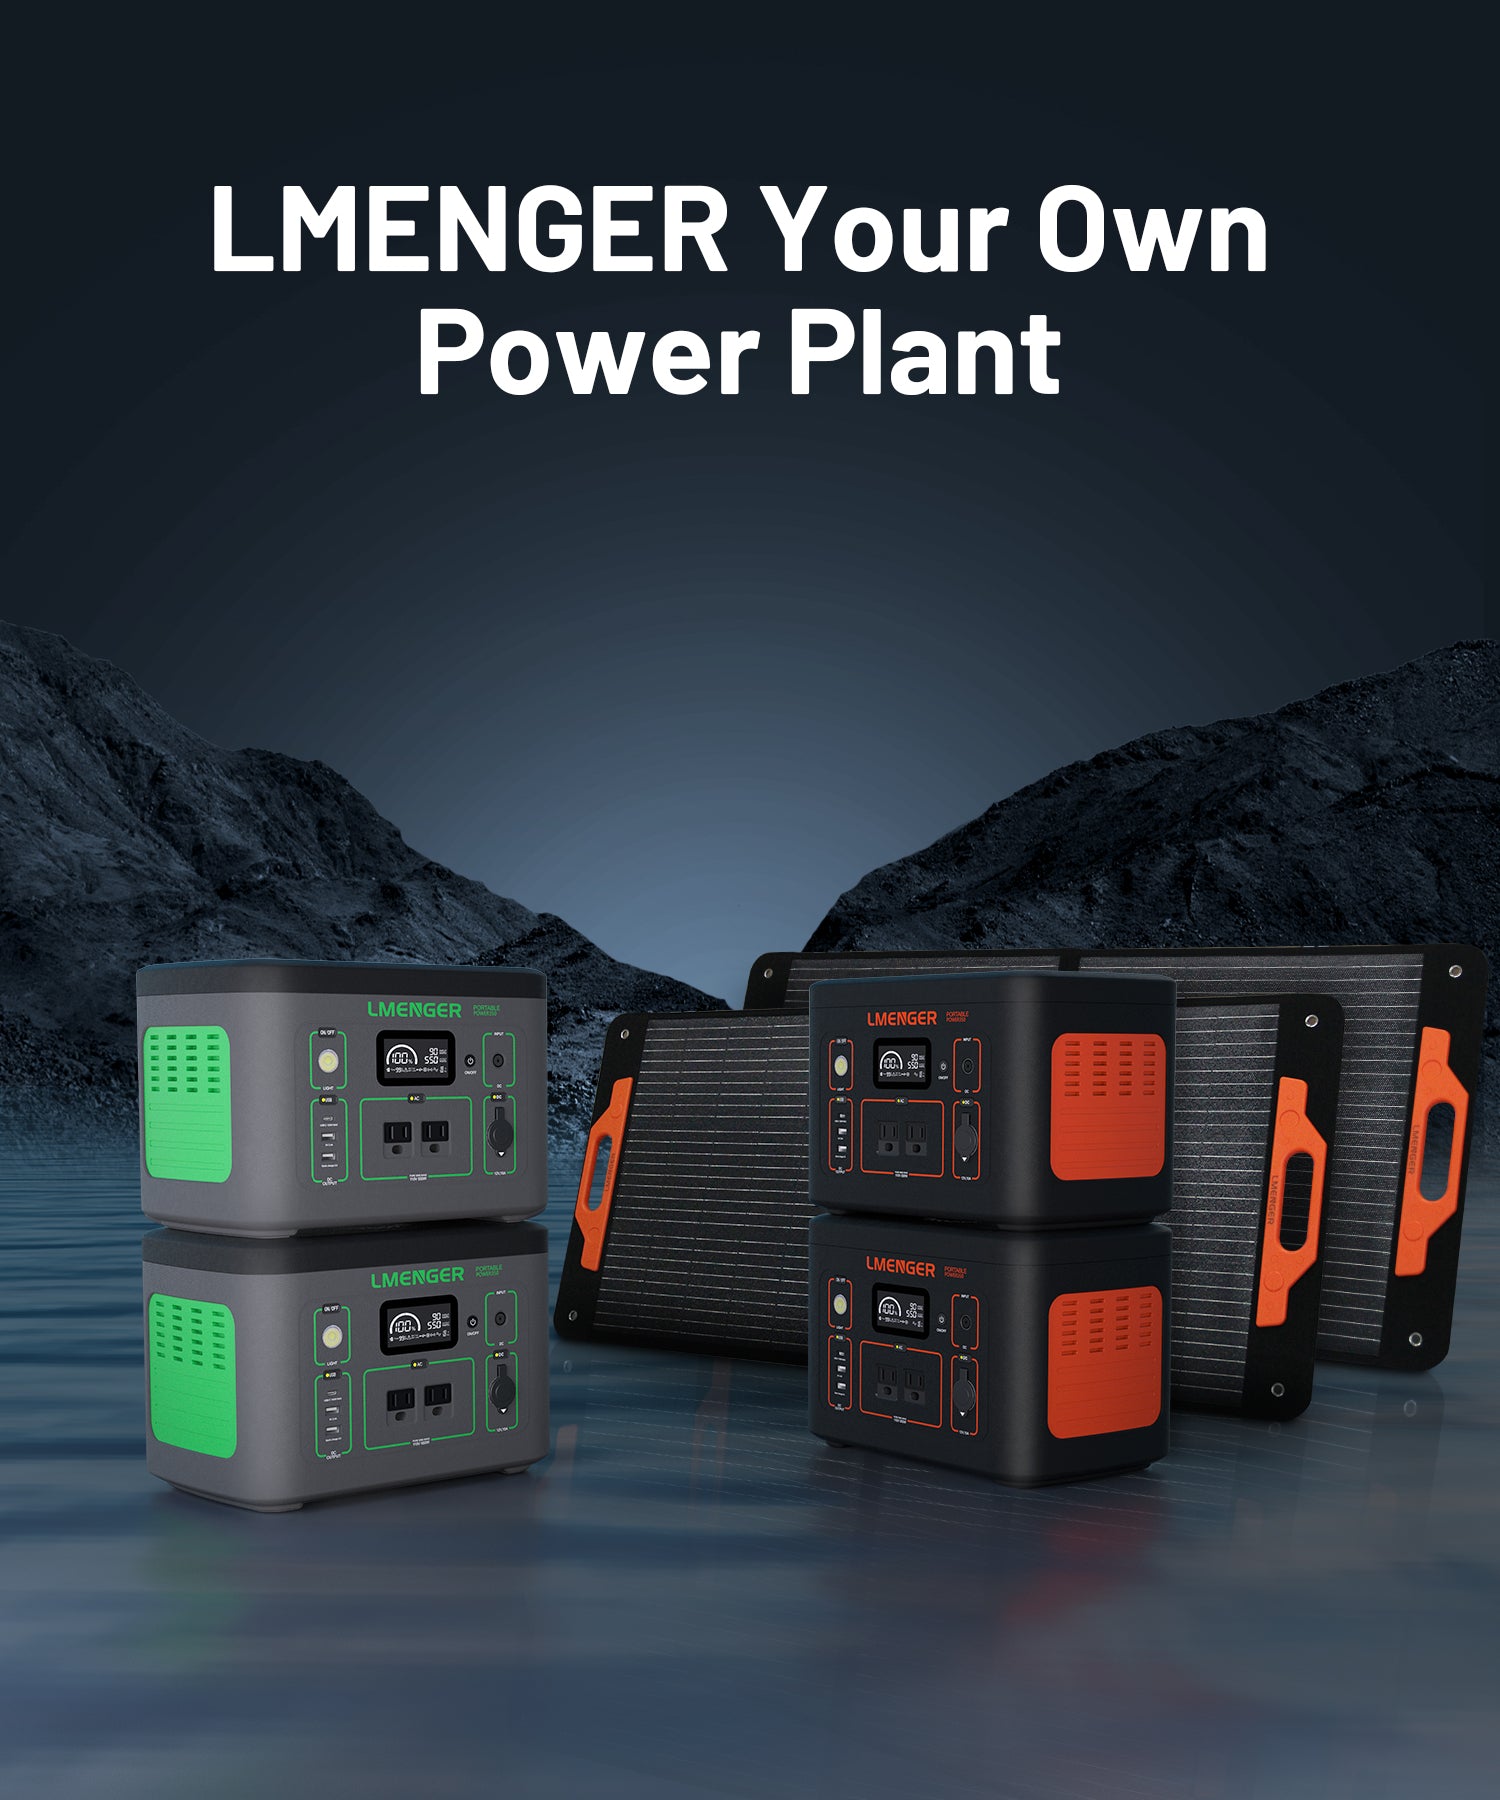 Why buy a home solar generator? LMENGER solar generator is the best choice